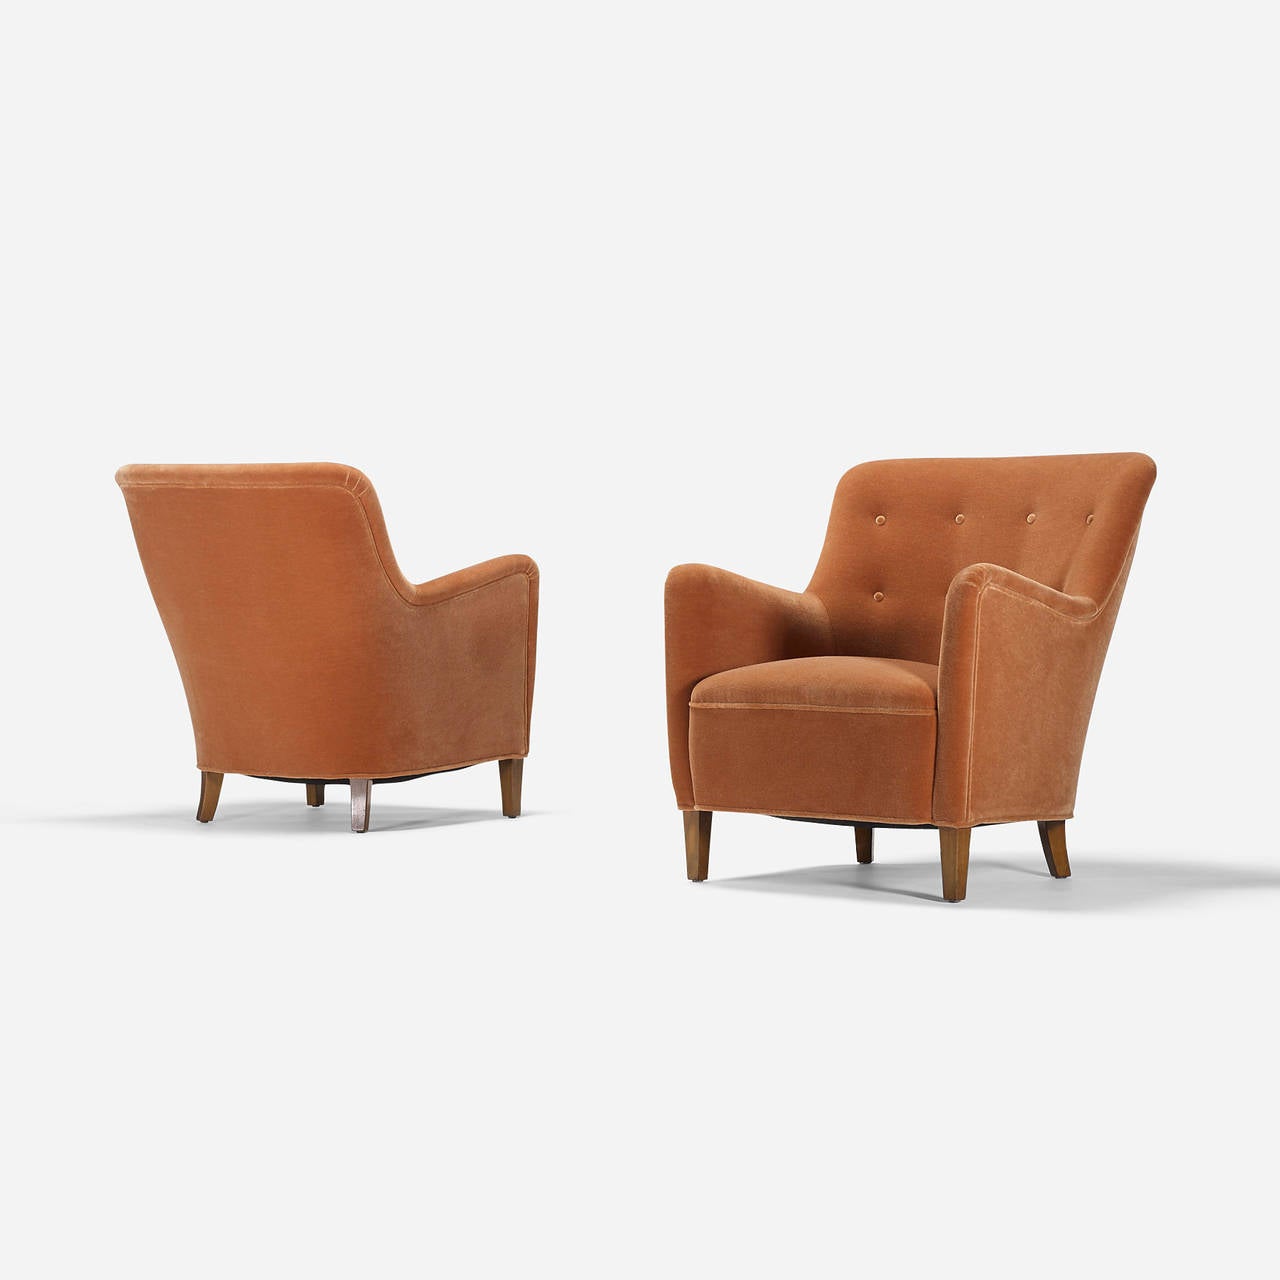 Lounge chairs pair by Birte Iversen for A.J. Iversen.